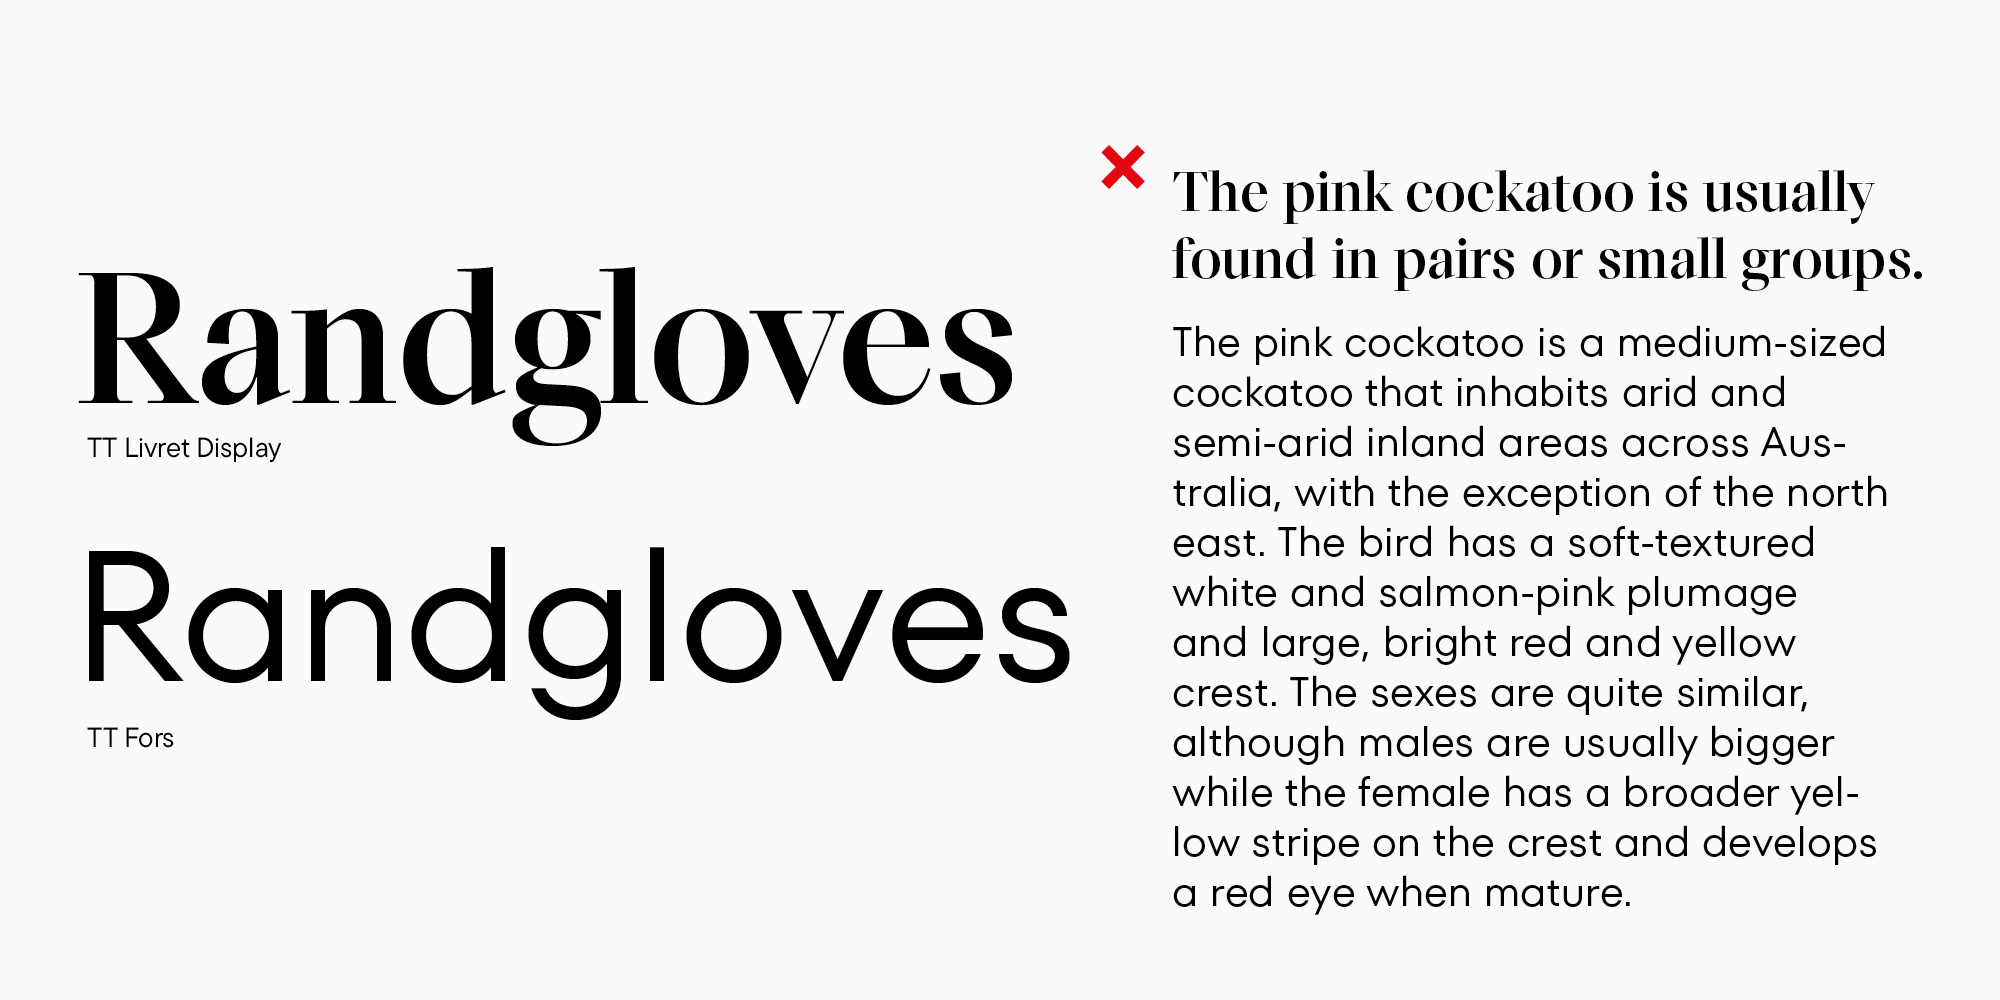 Choosing and Mixing Typefaces